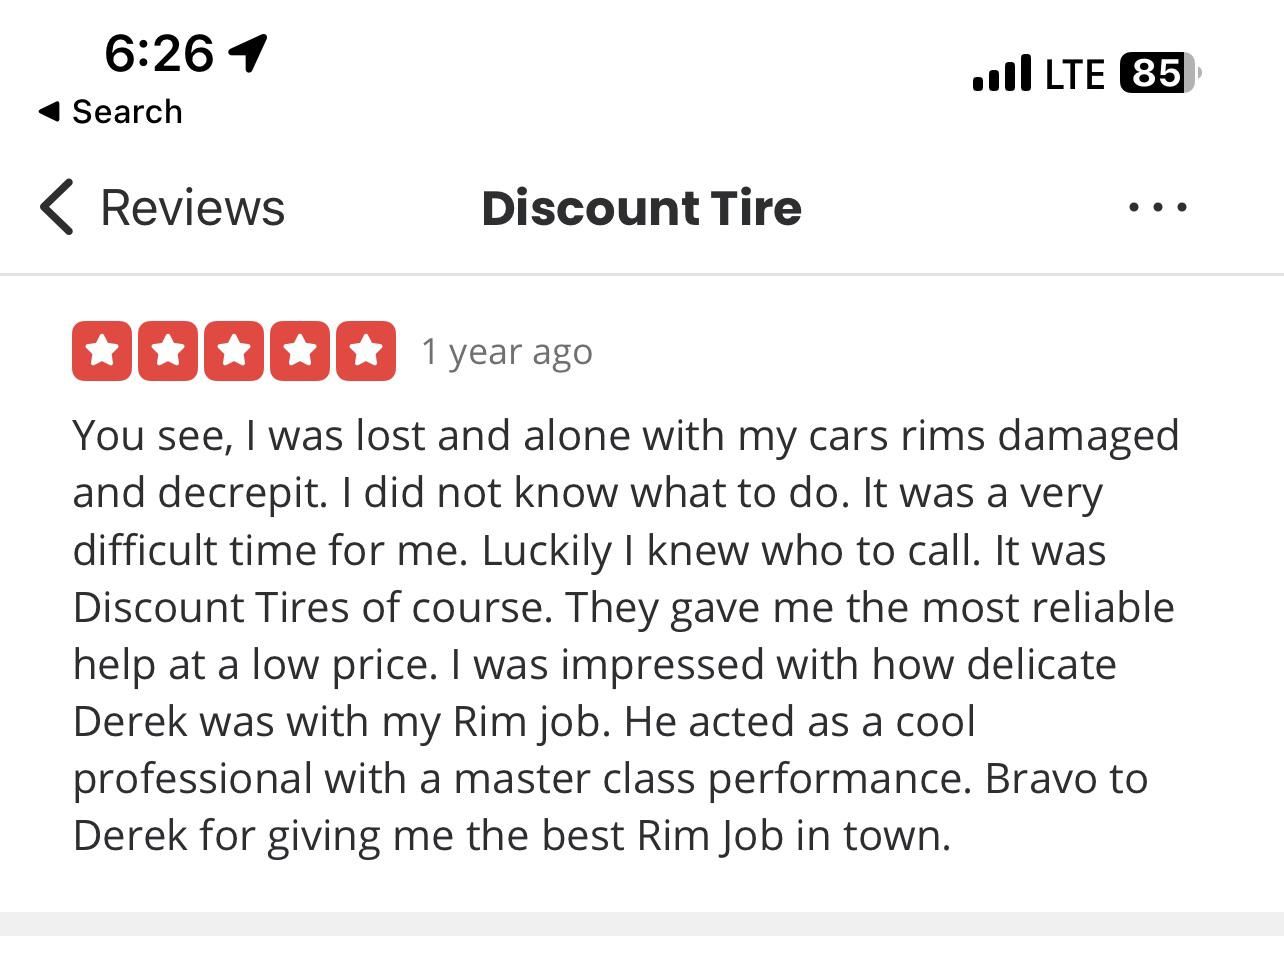 This Yelp review for discount tire